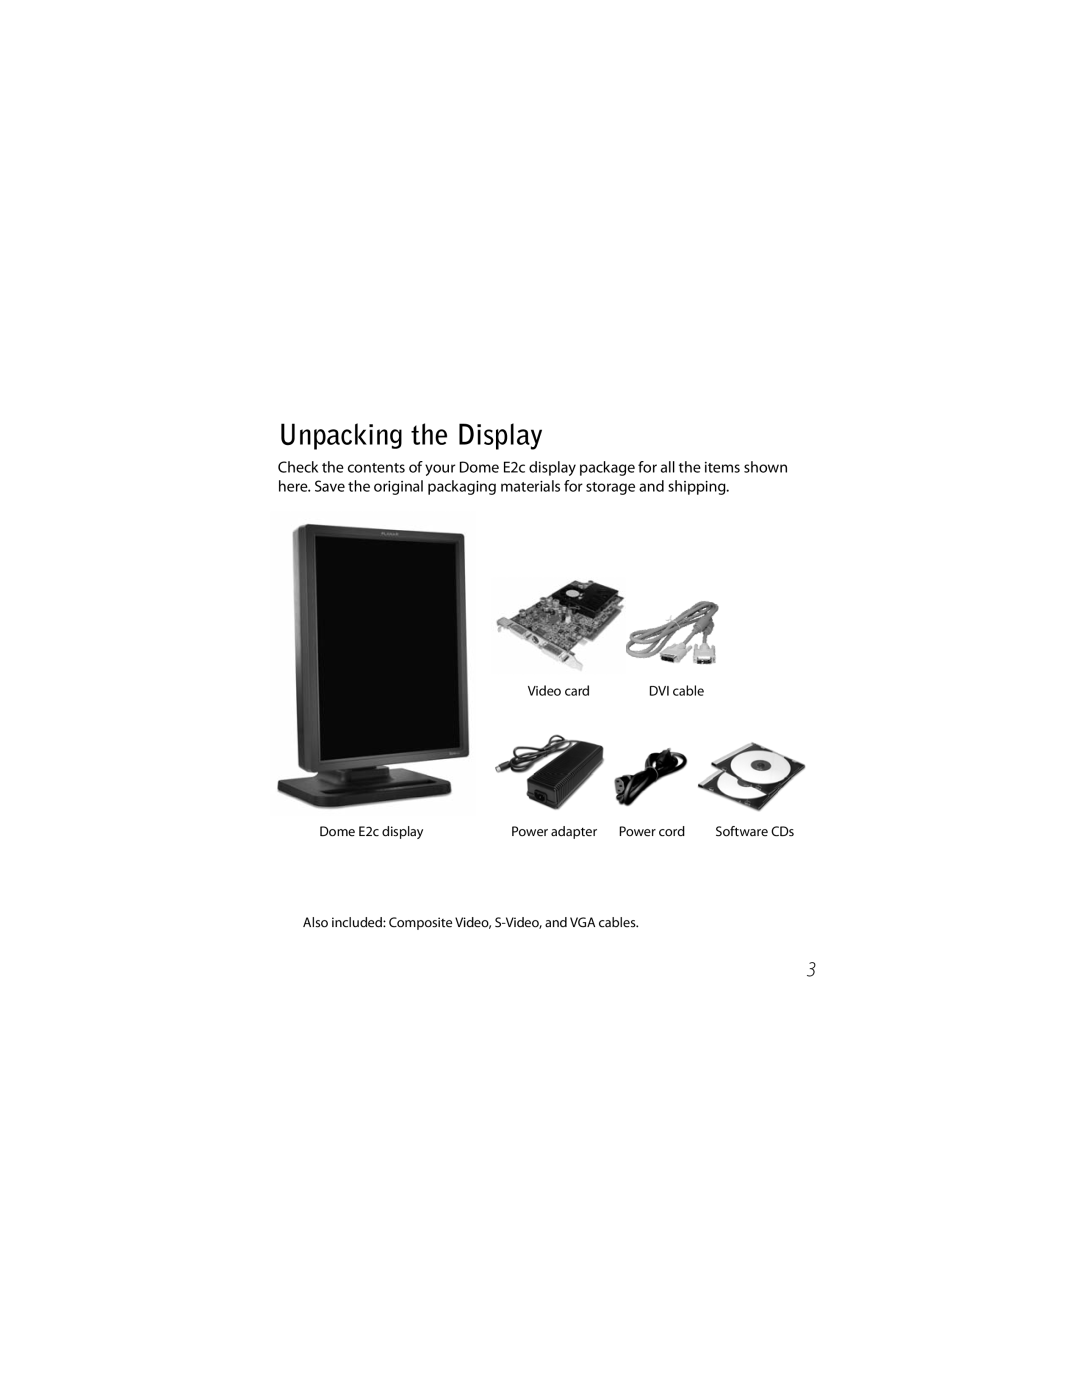 Planar manual Unpacking the Display, Video card, Dome E2c display, Power adapter Power cord, DVI cable, Software CDs 